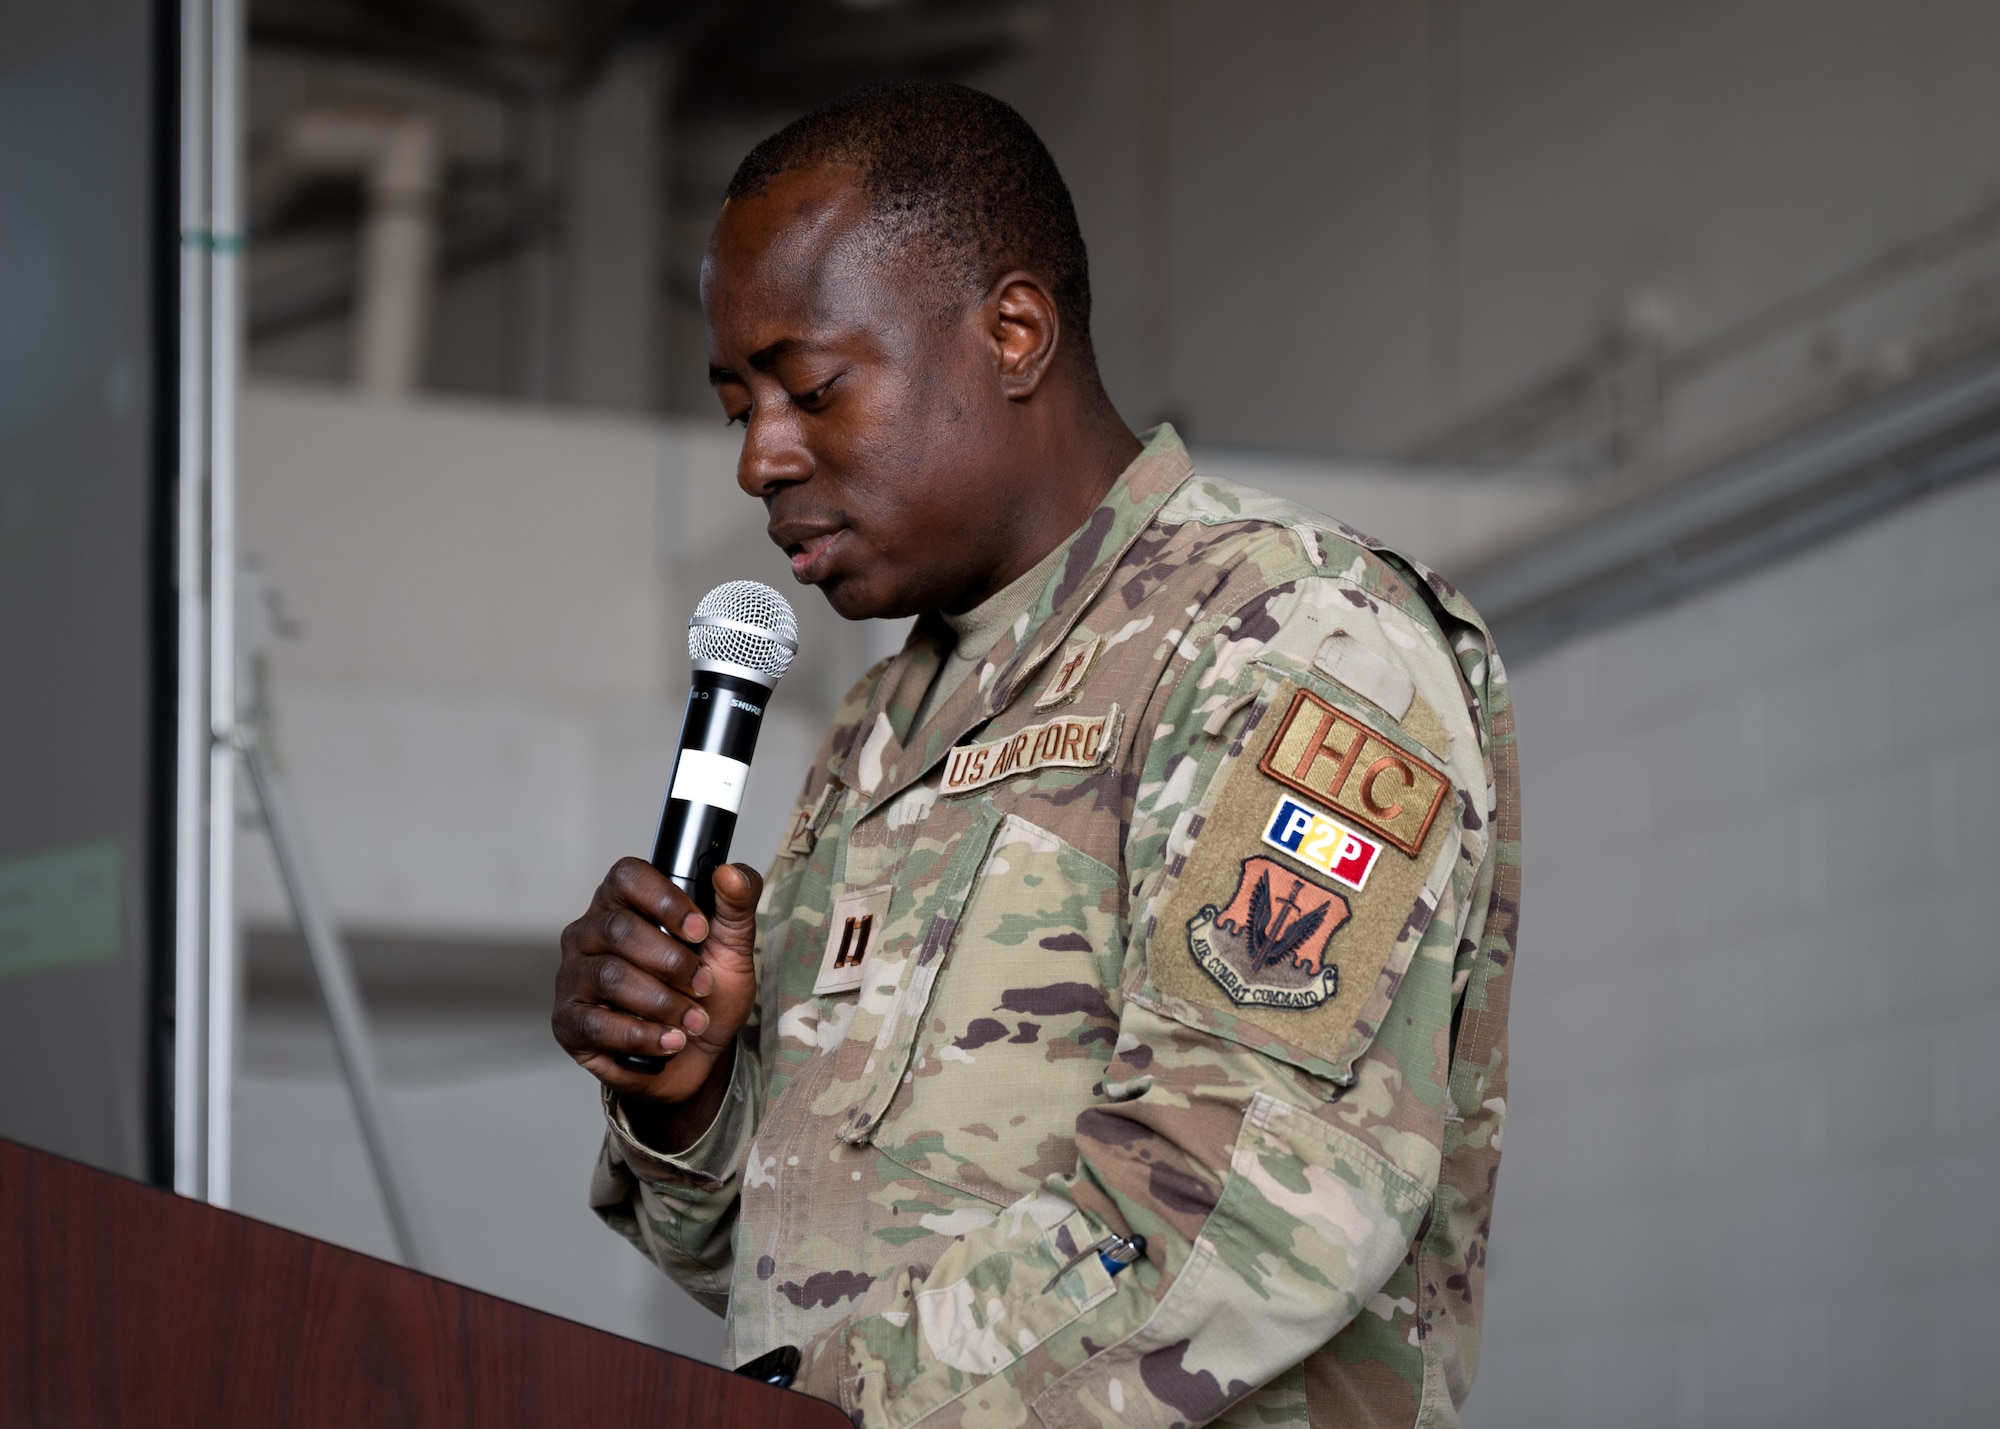 U.S. Air Force chaplain delivers invocation at Honorary Commander Ceremony